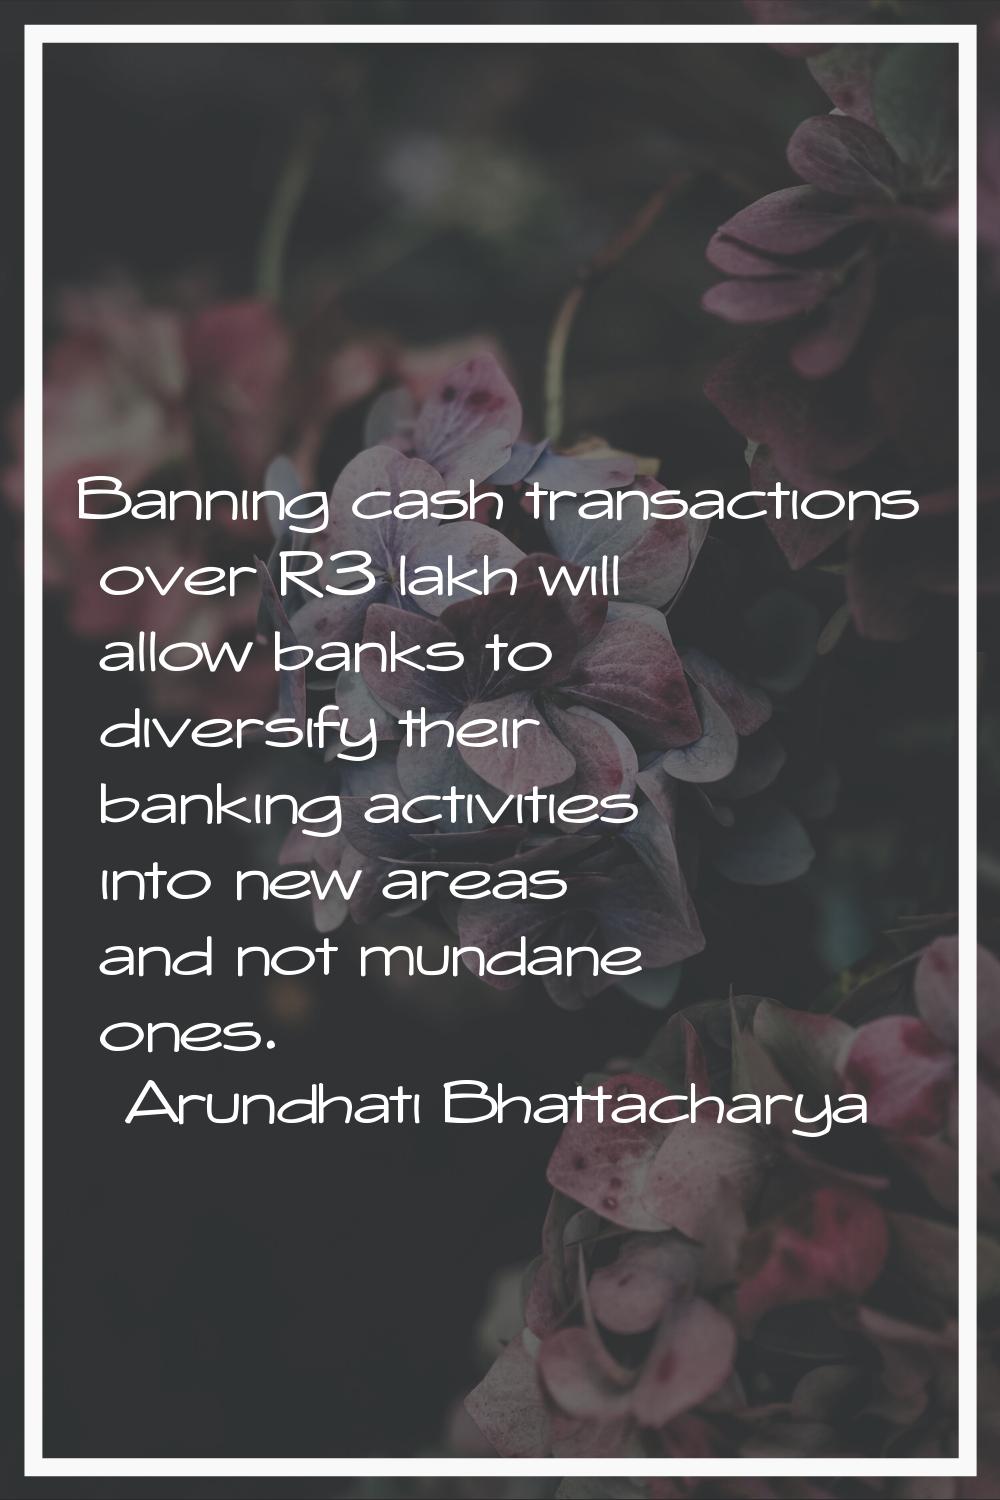 Banning cash transactions over R3 lakh will allow banks to diversify their banking activities into 